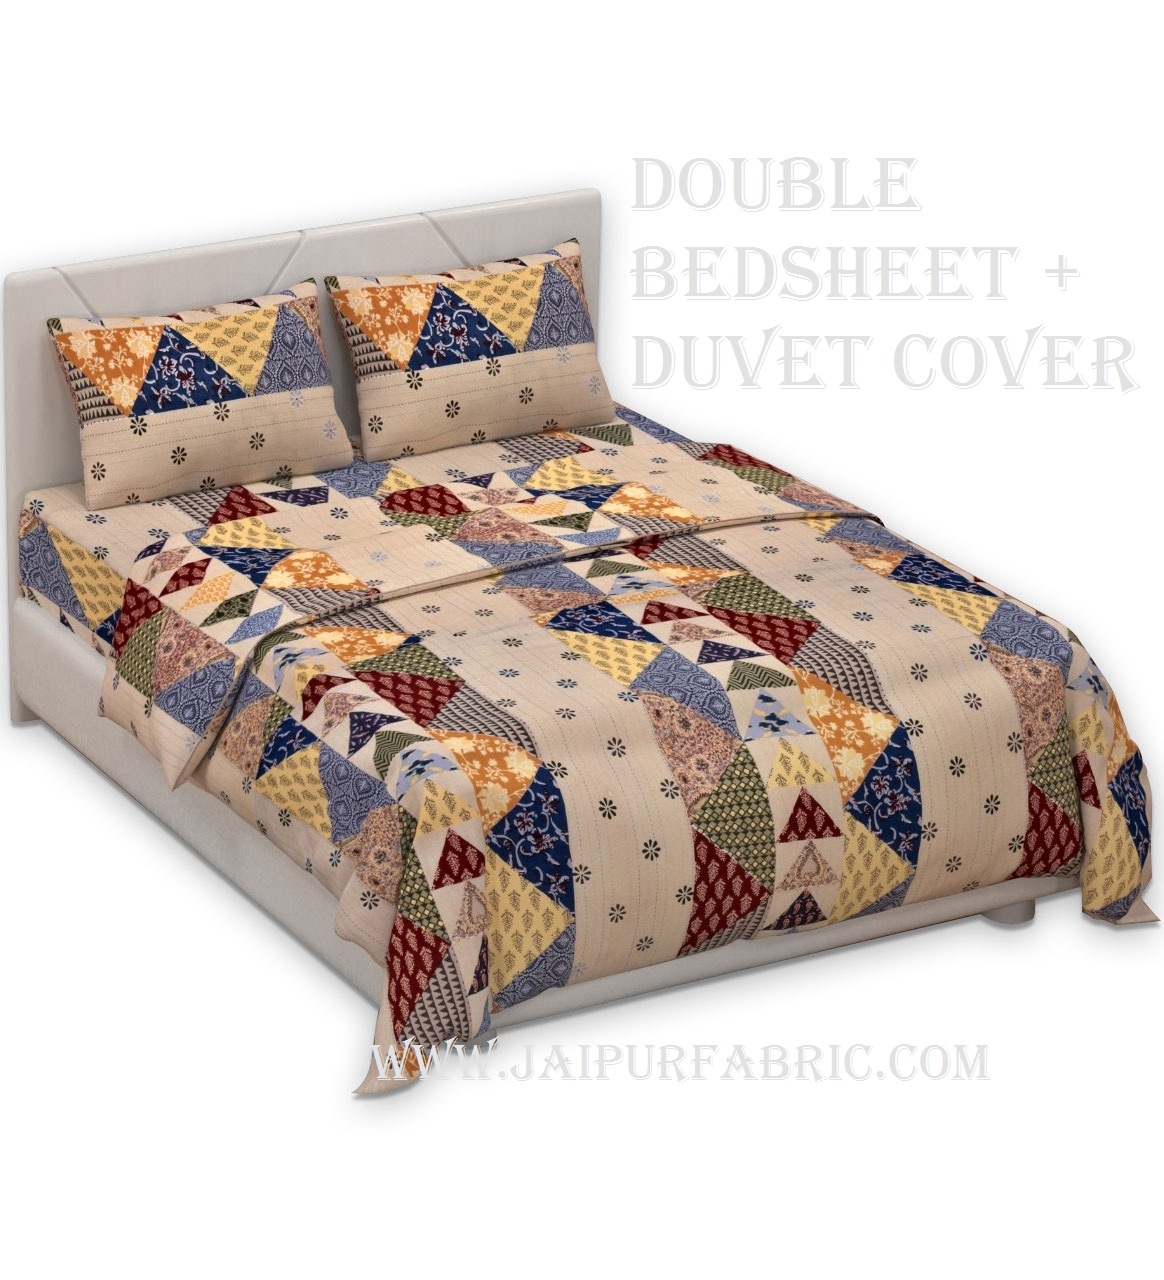 COMBO199 Duvet Cover + Matching Double Bedsheet  with Pillow Cover